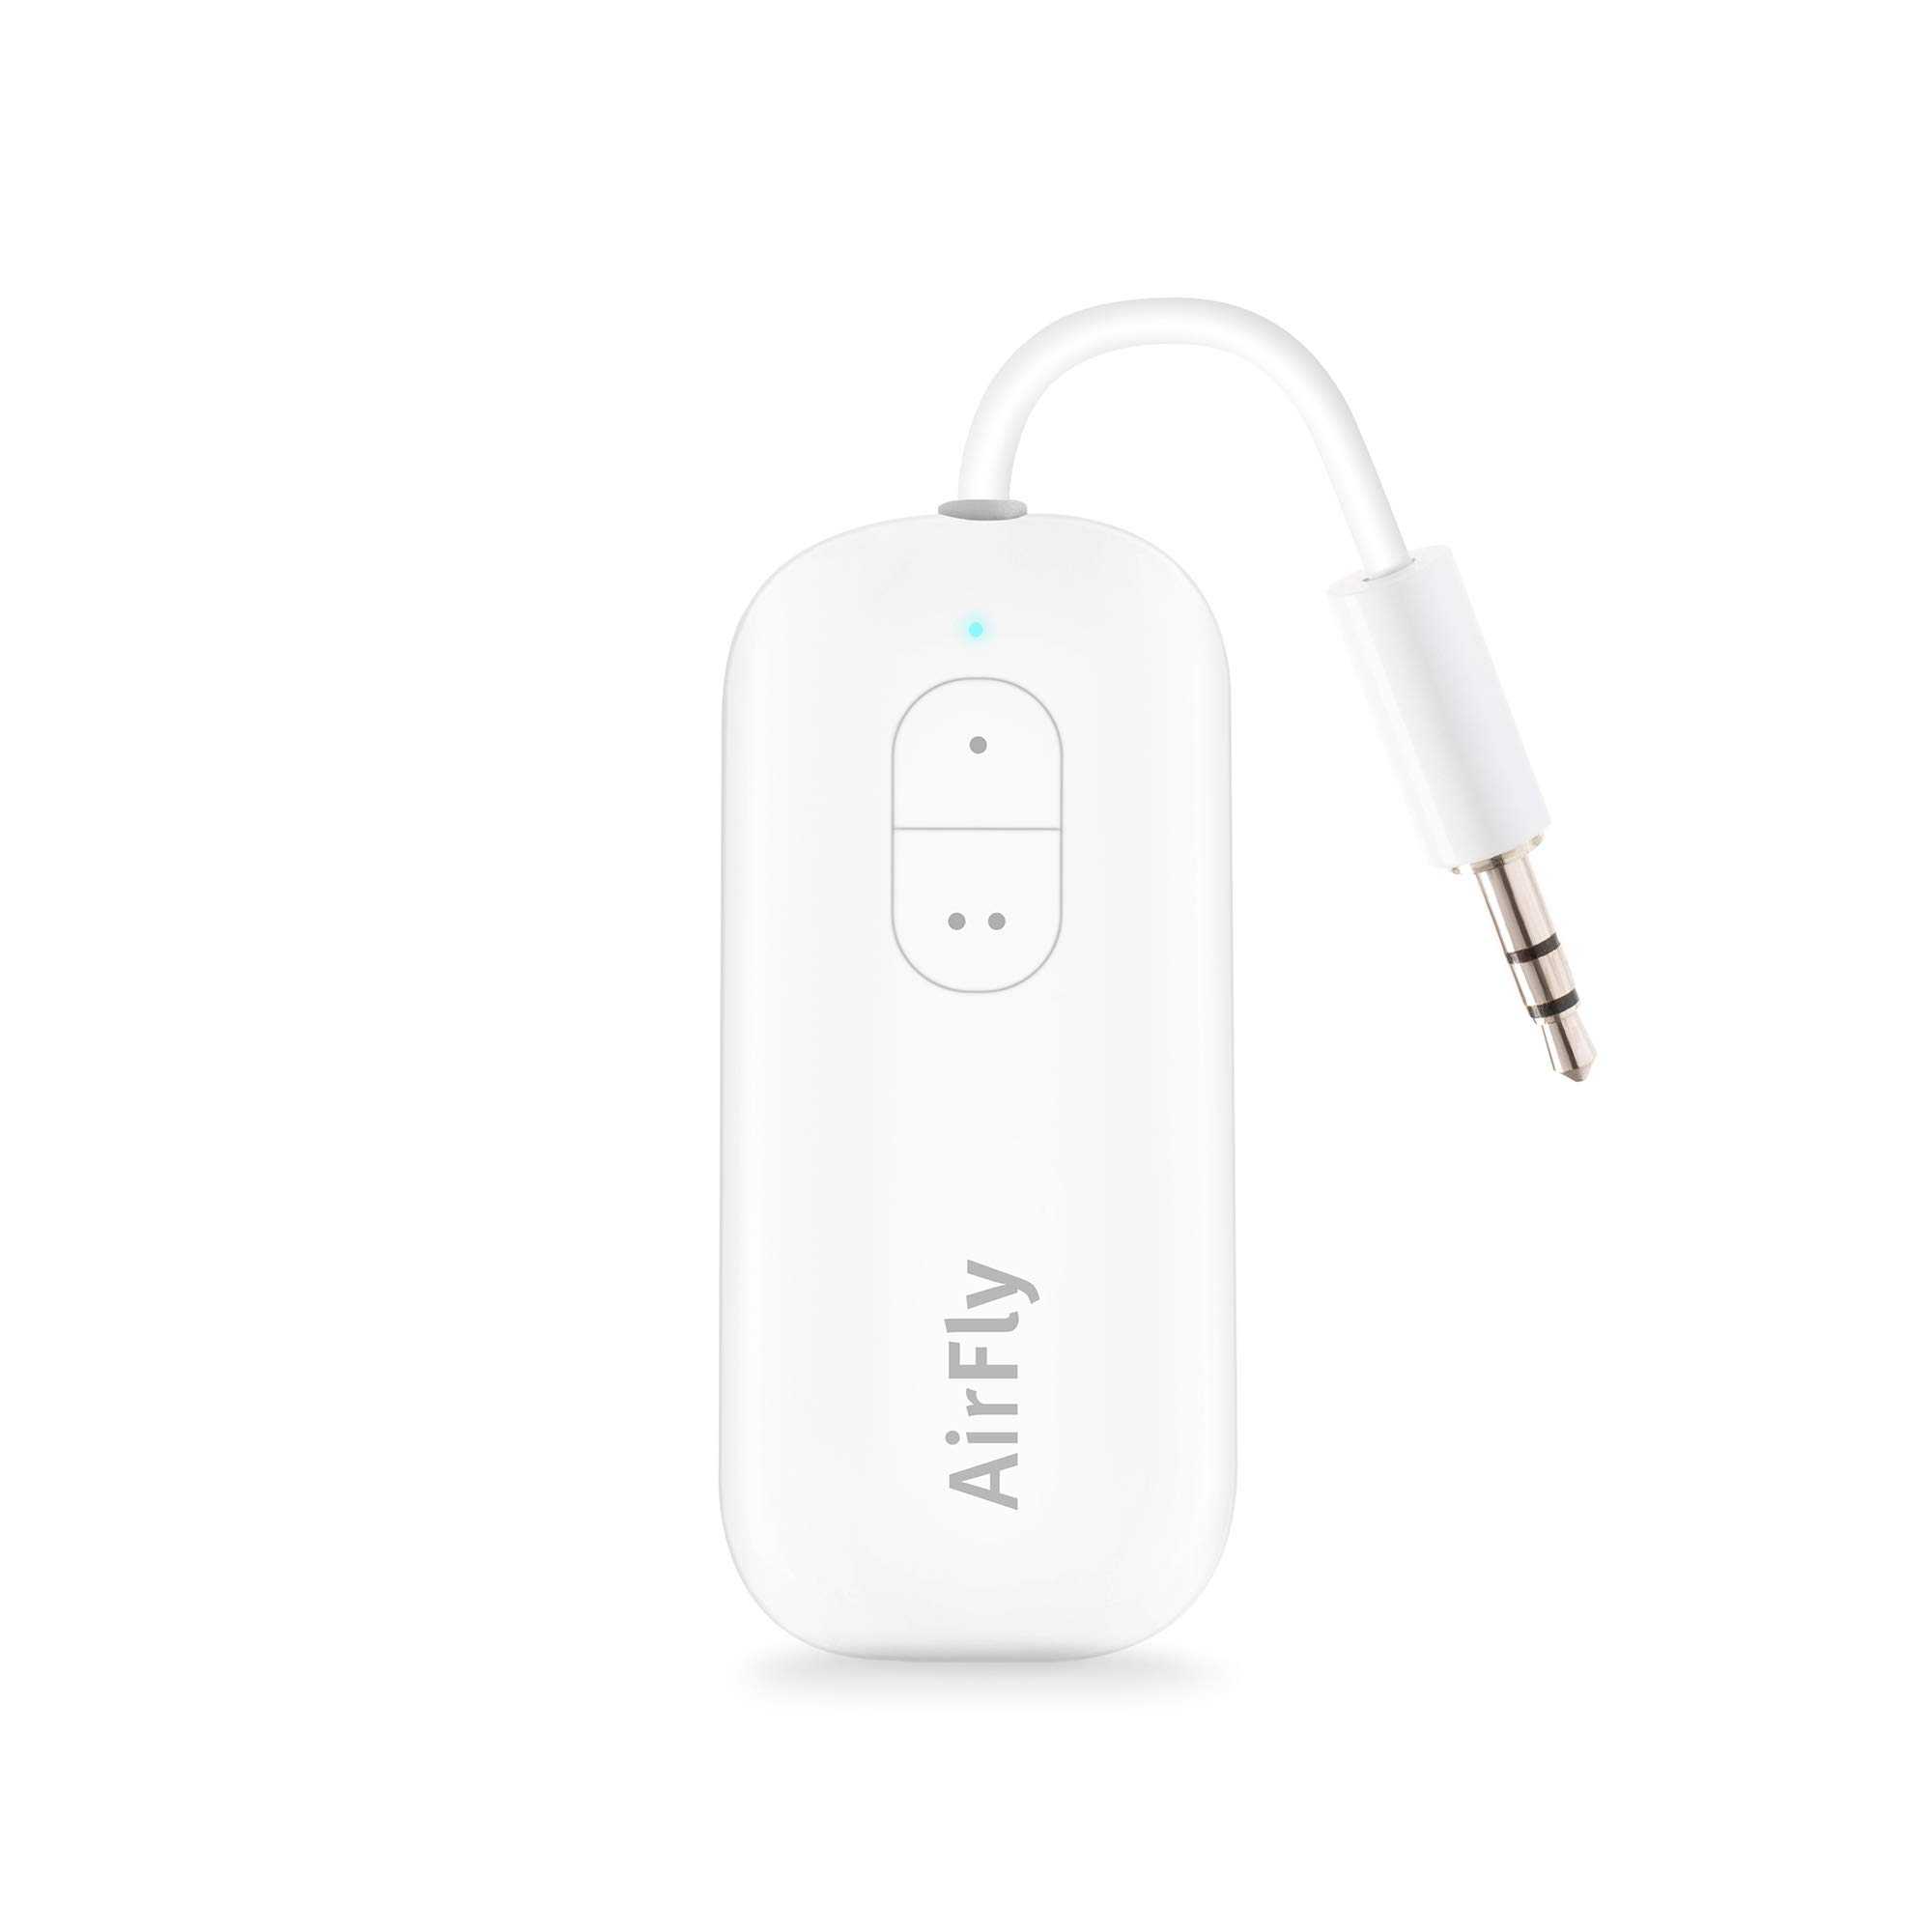 Twelve South AirFly Duo | Bluetooth Wireless Transmitter with Audio Sharing for up to 2 AirPods